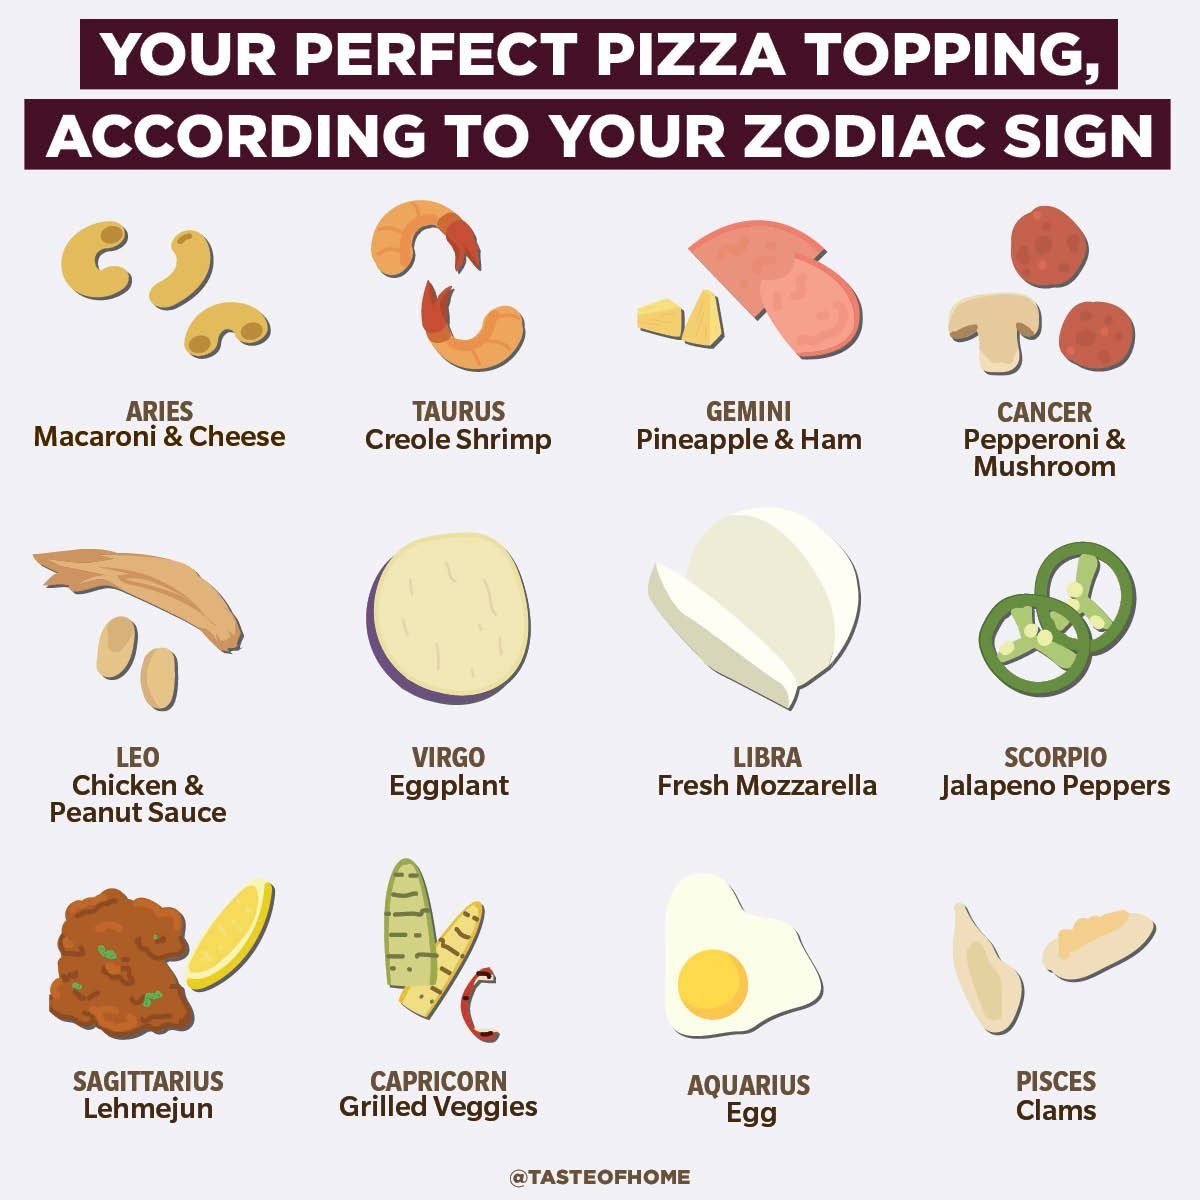 Your Perfect Pizza Topping, According to Your Zodiac Sign